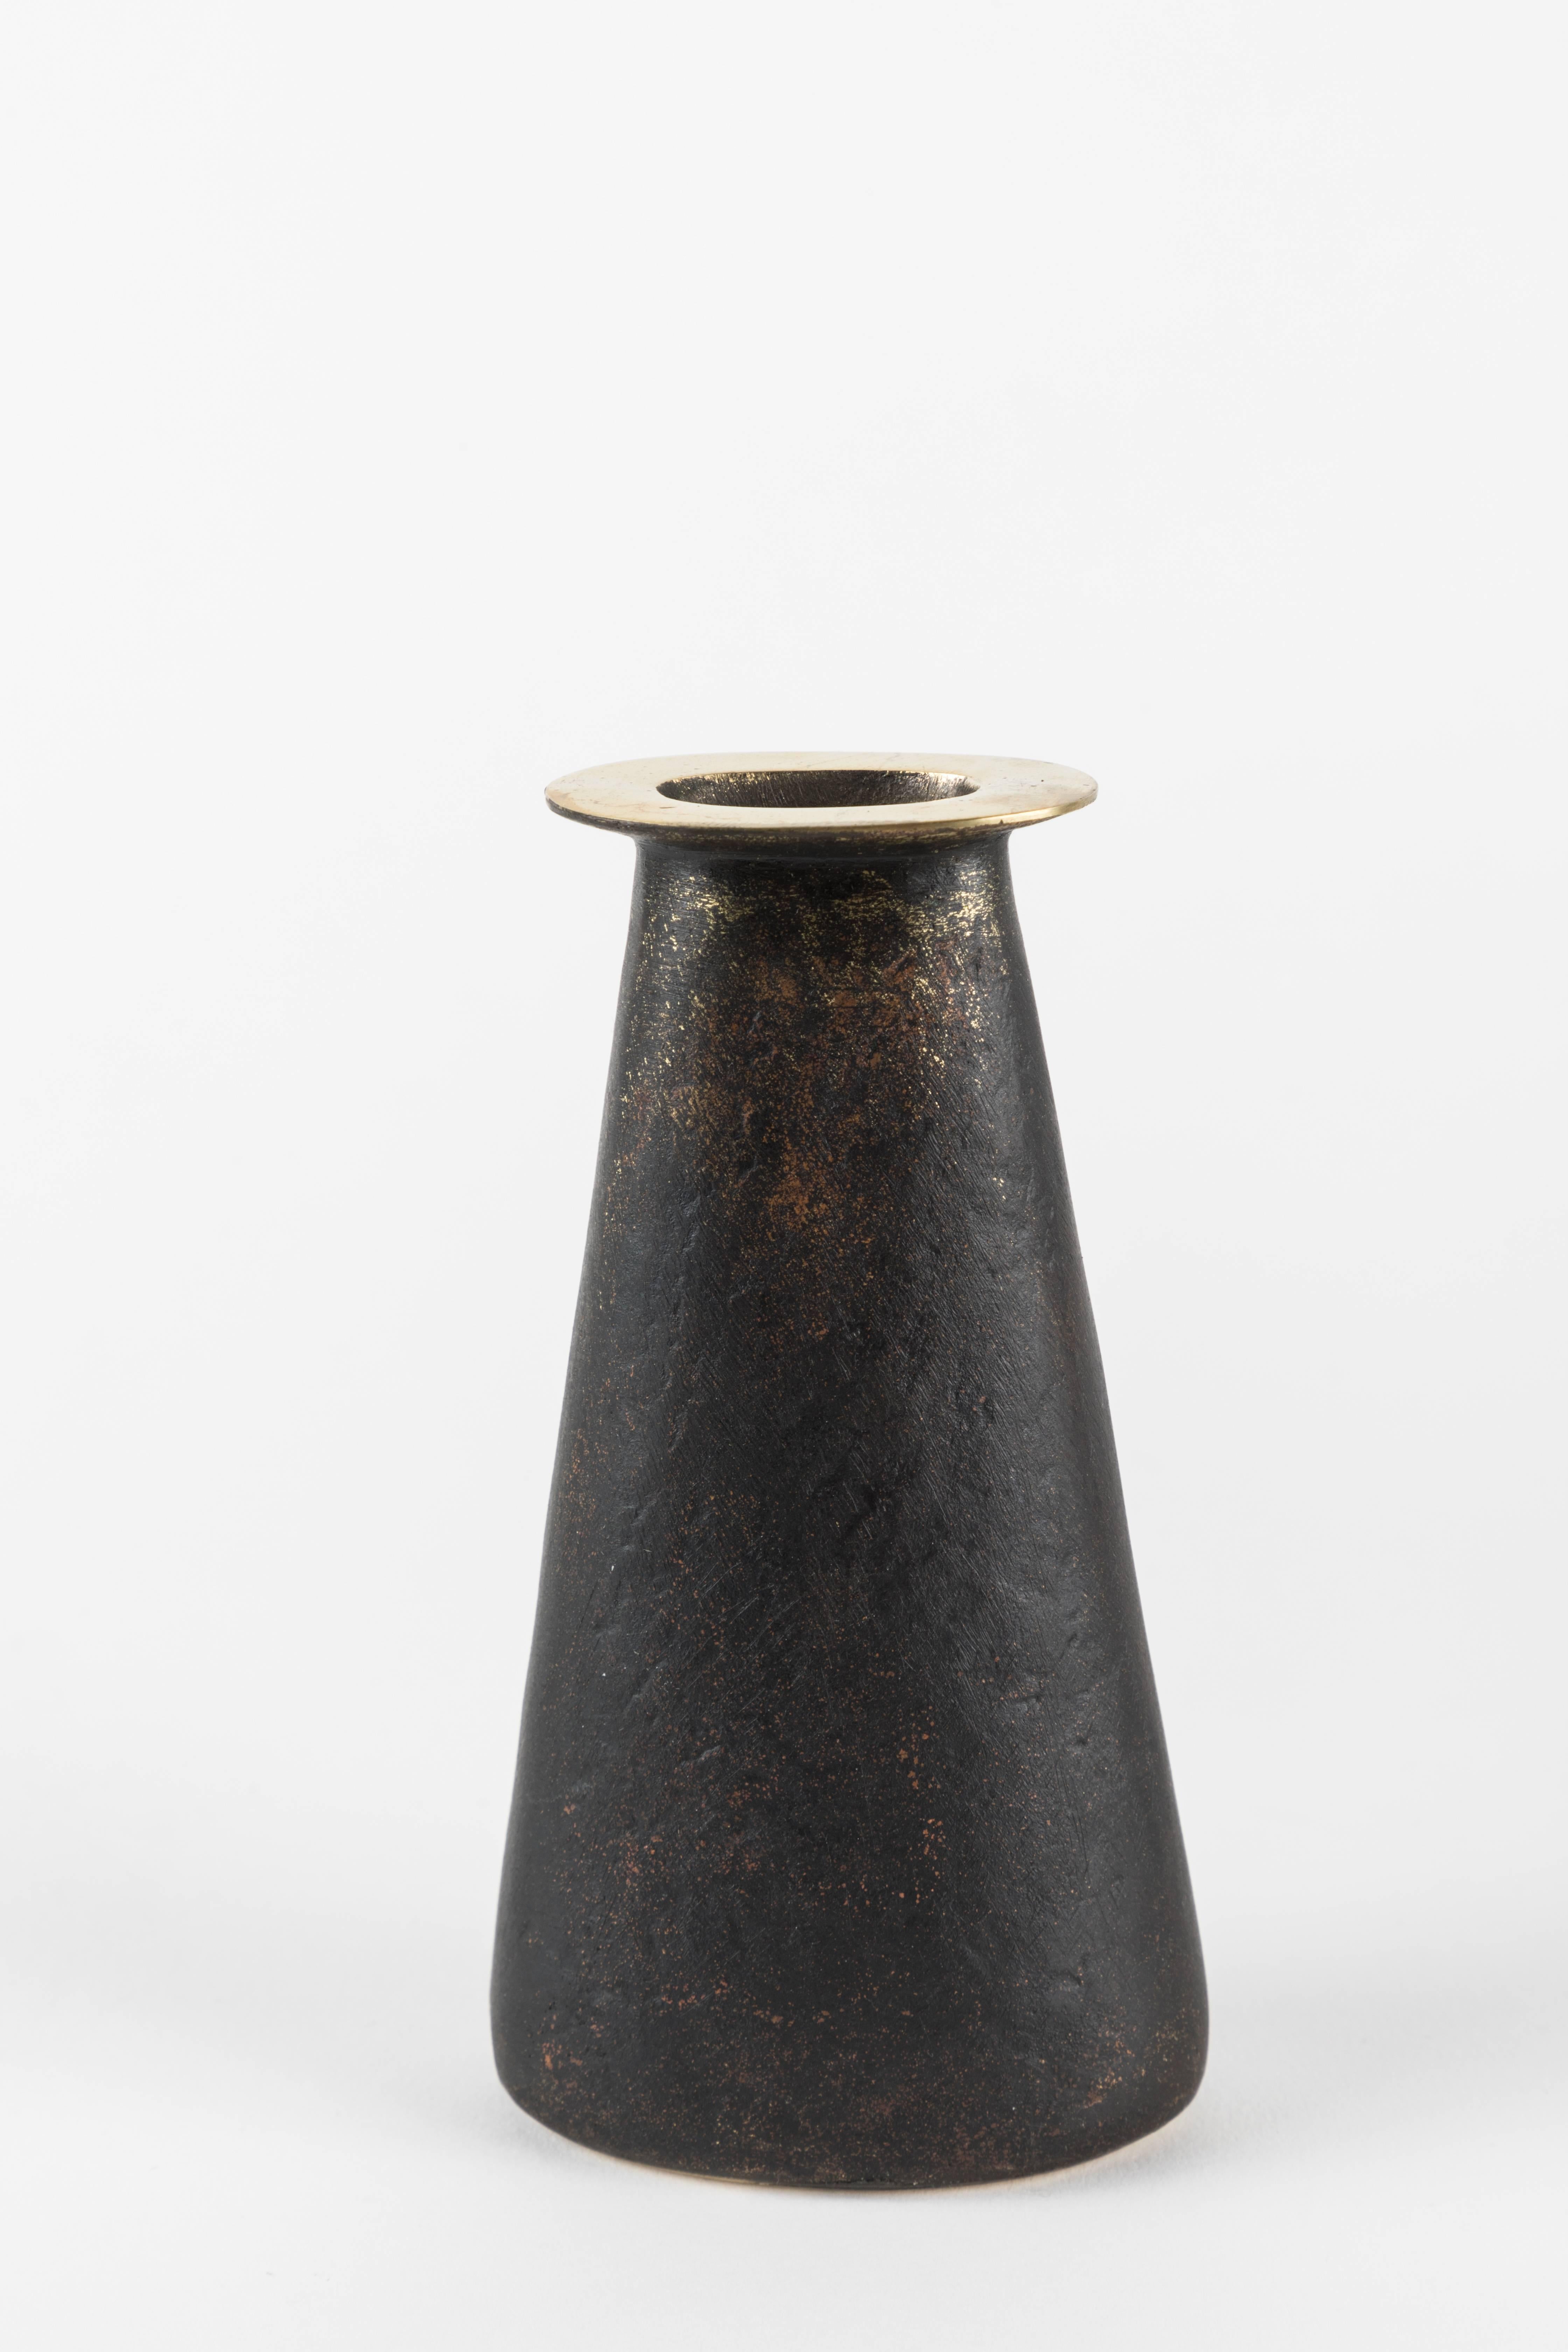 Carl Auböck model #3975 brass vase. Designed in the 1950s, this incredibly refined and sculptural Viennese vase is executed in polished and darkly patinated brass by Werkstätte Carl Auböck, Austria. 

Produced by Carl Auböck IV in the original